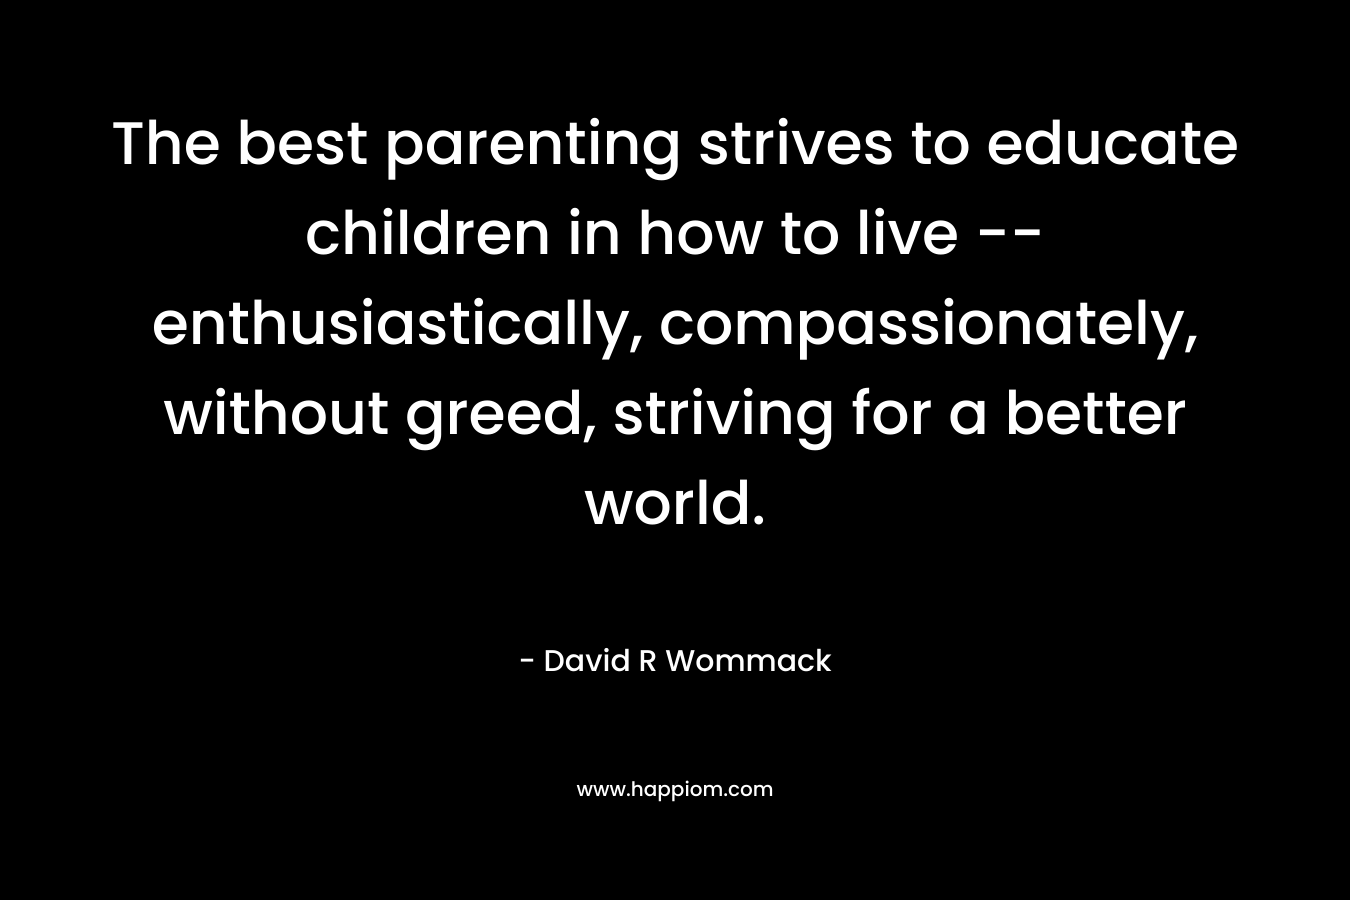 The best parenting strives to educate children in how to live -- enthusiastically, compassionately, without greed, striving for a better world.